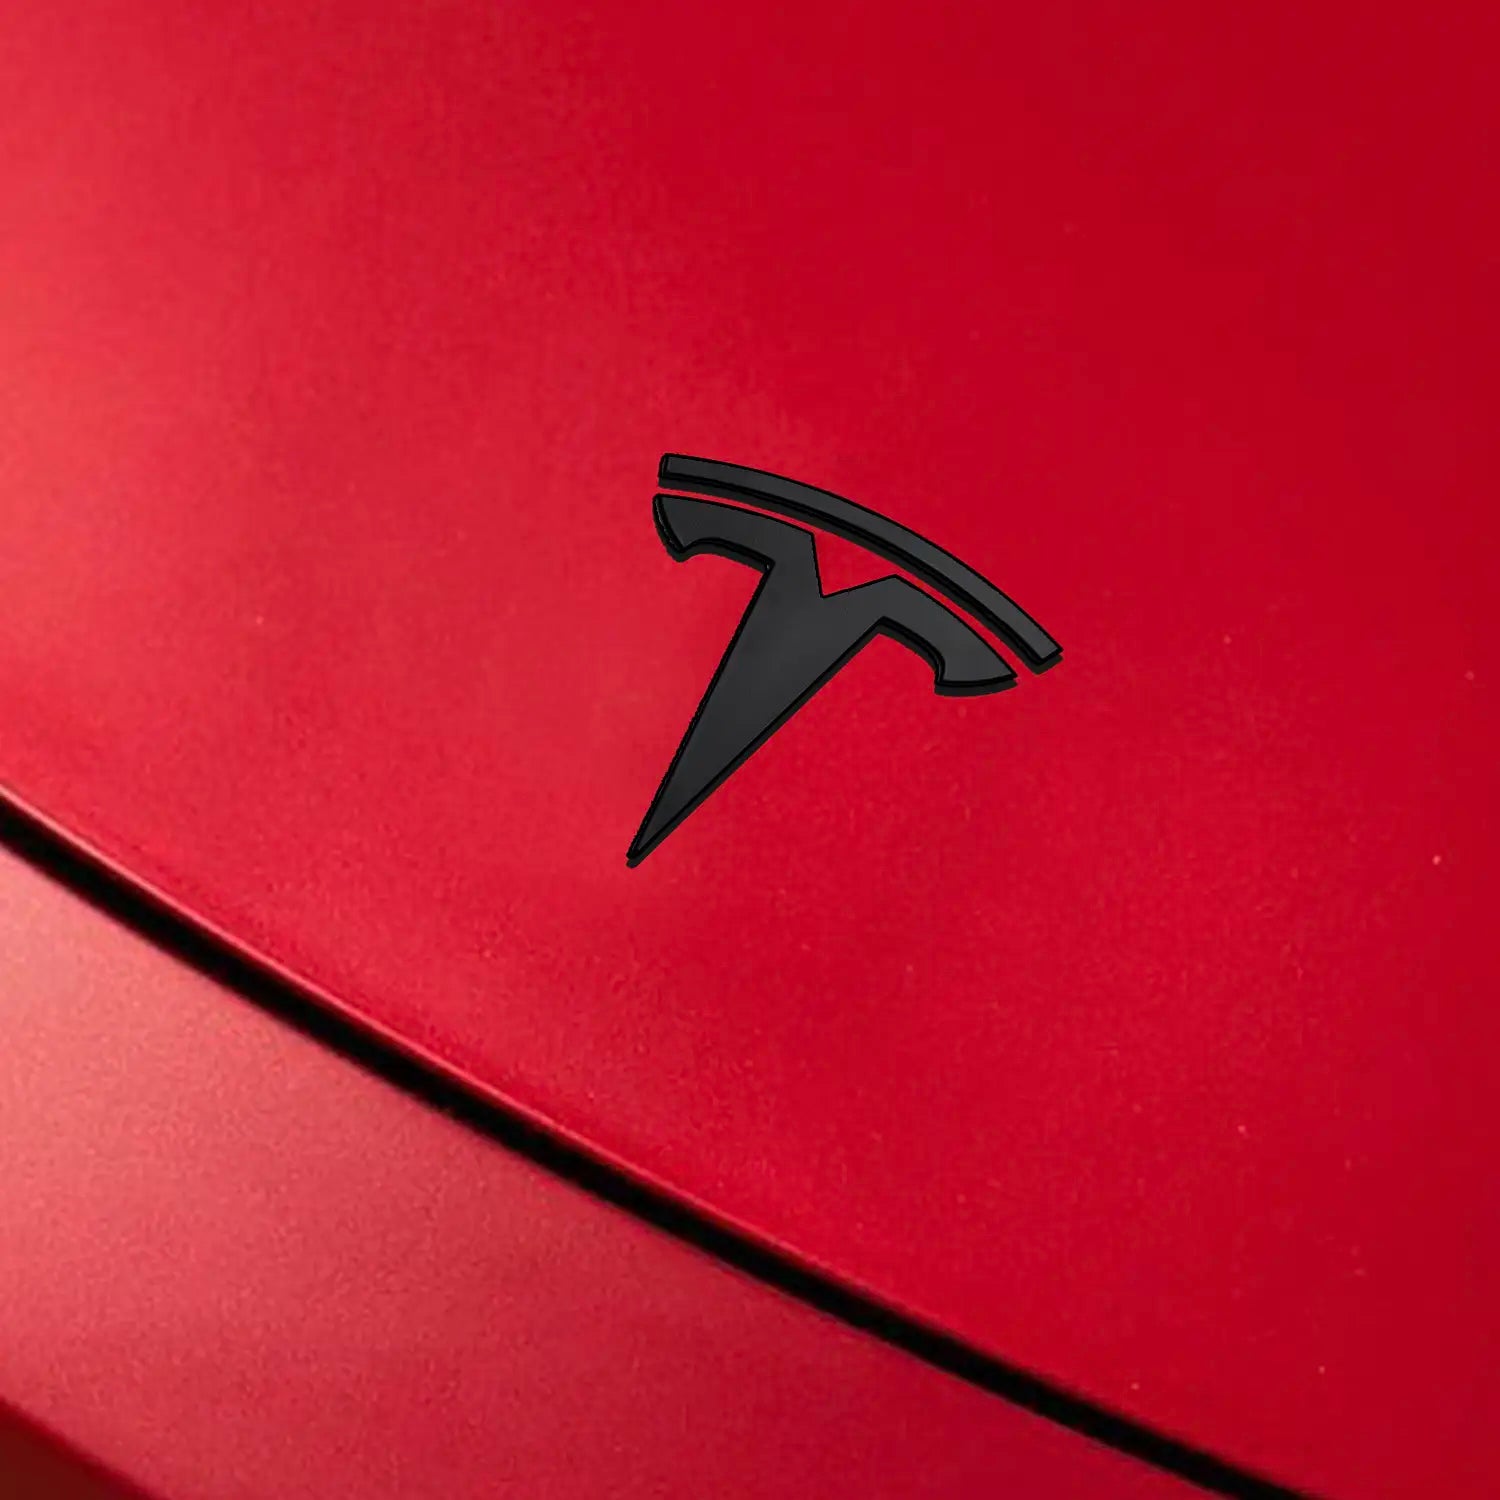 Adreama Tesla Model Y ABS T Logo Decal Cover for Trunk and Frunk, 2 Pack - Matte Black (Ships Within 5-7 Days)